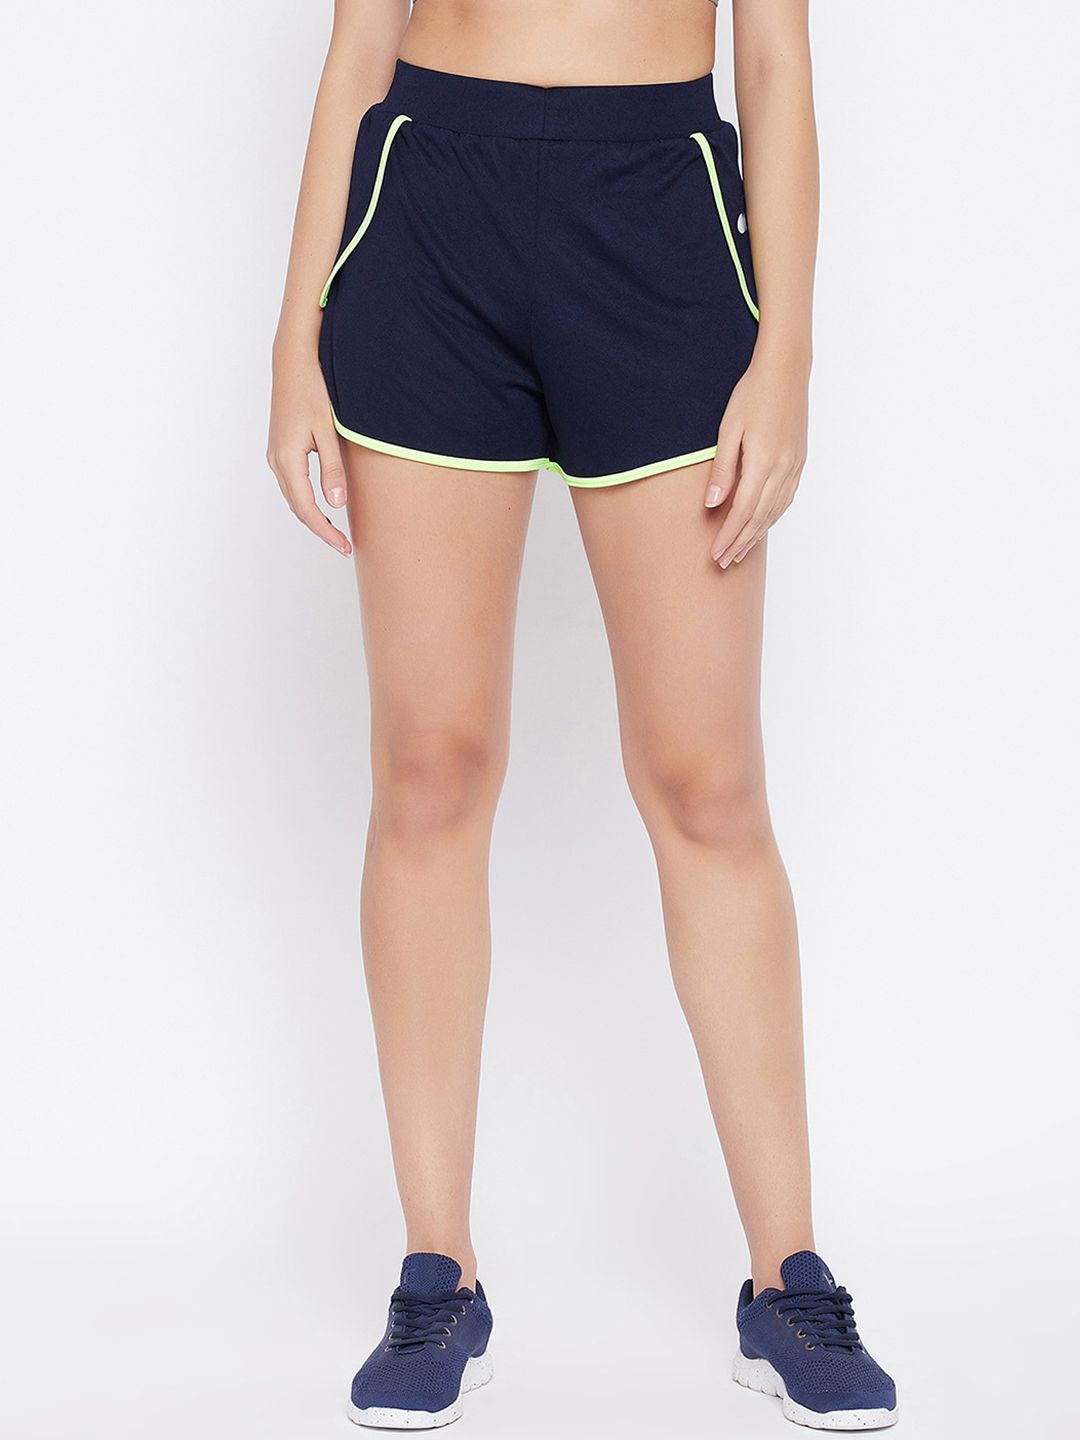 Clovia Women Navy Blue Slim Fit Cycling Shorts Price in India